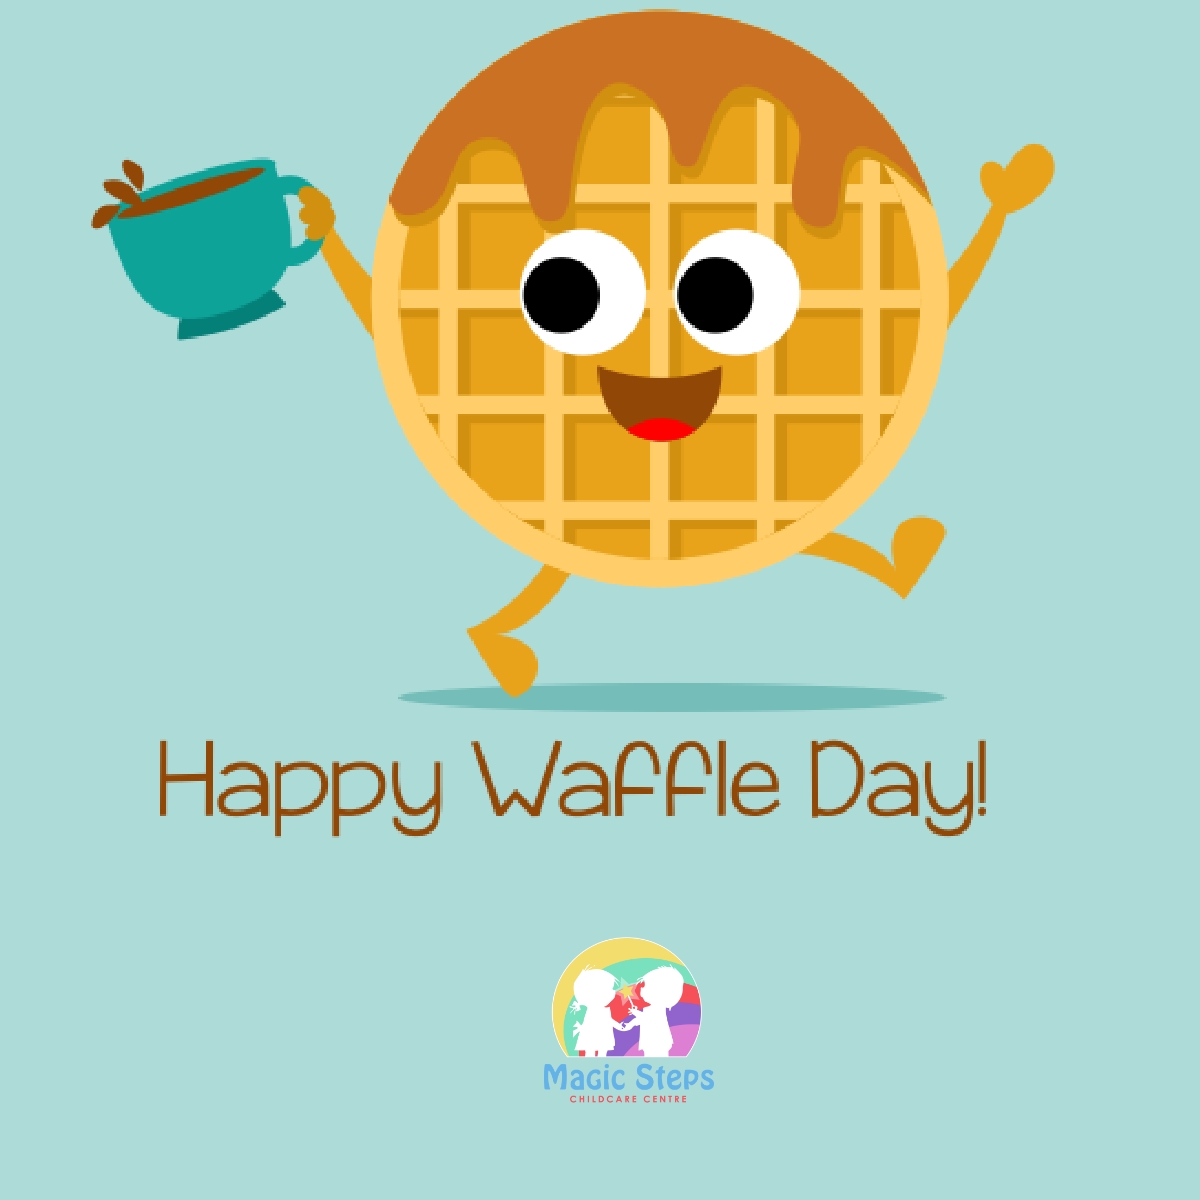 Happy Waffle Day- Tuesday 29th March